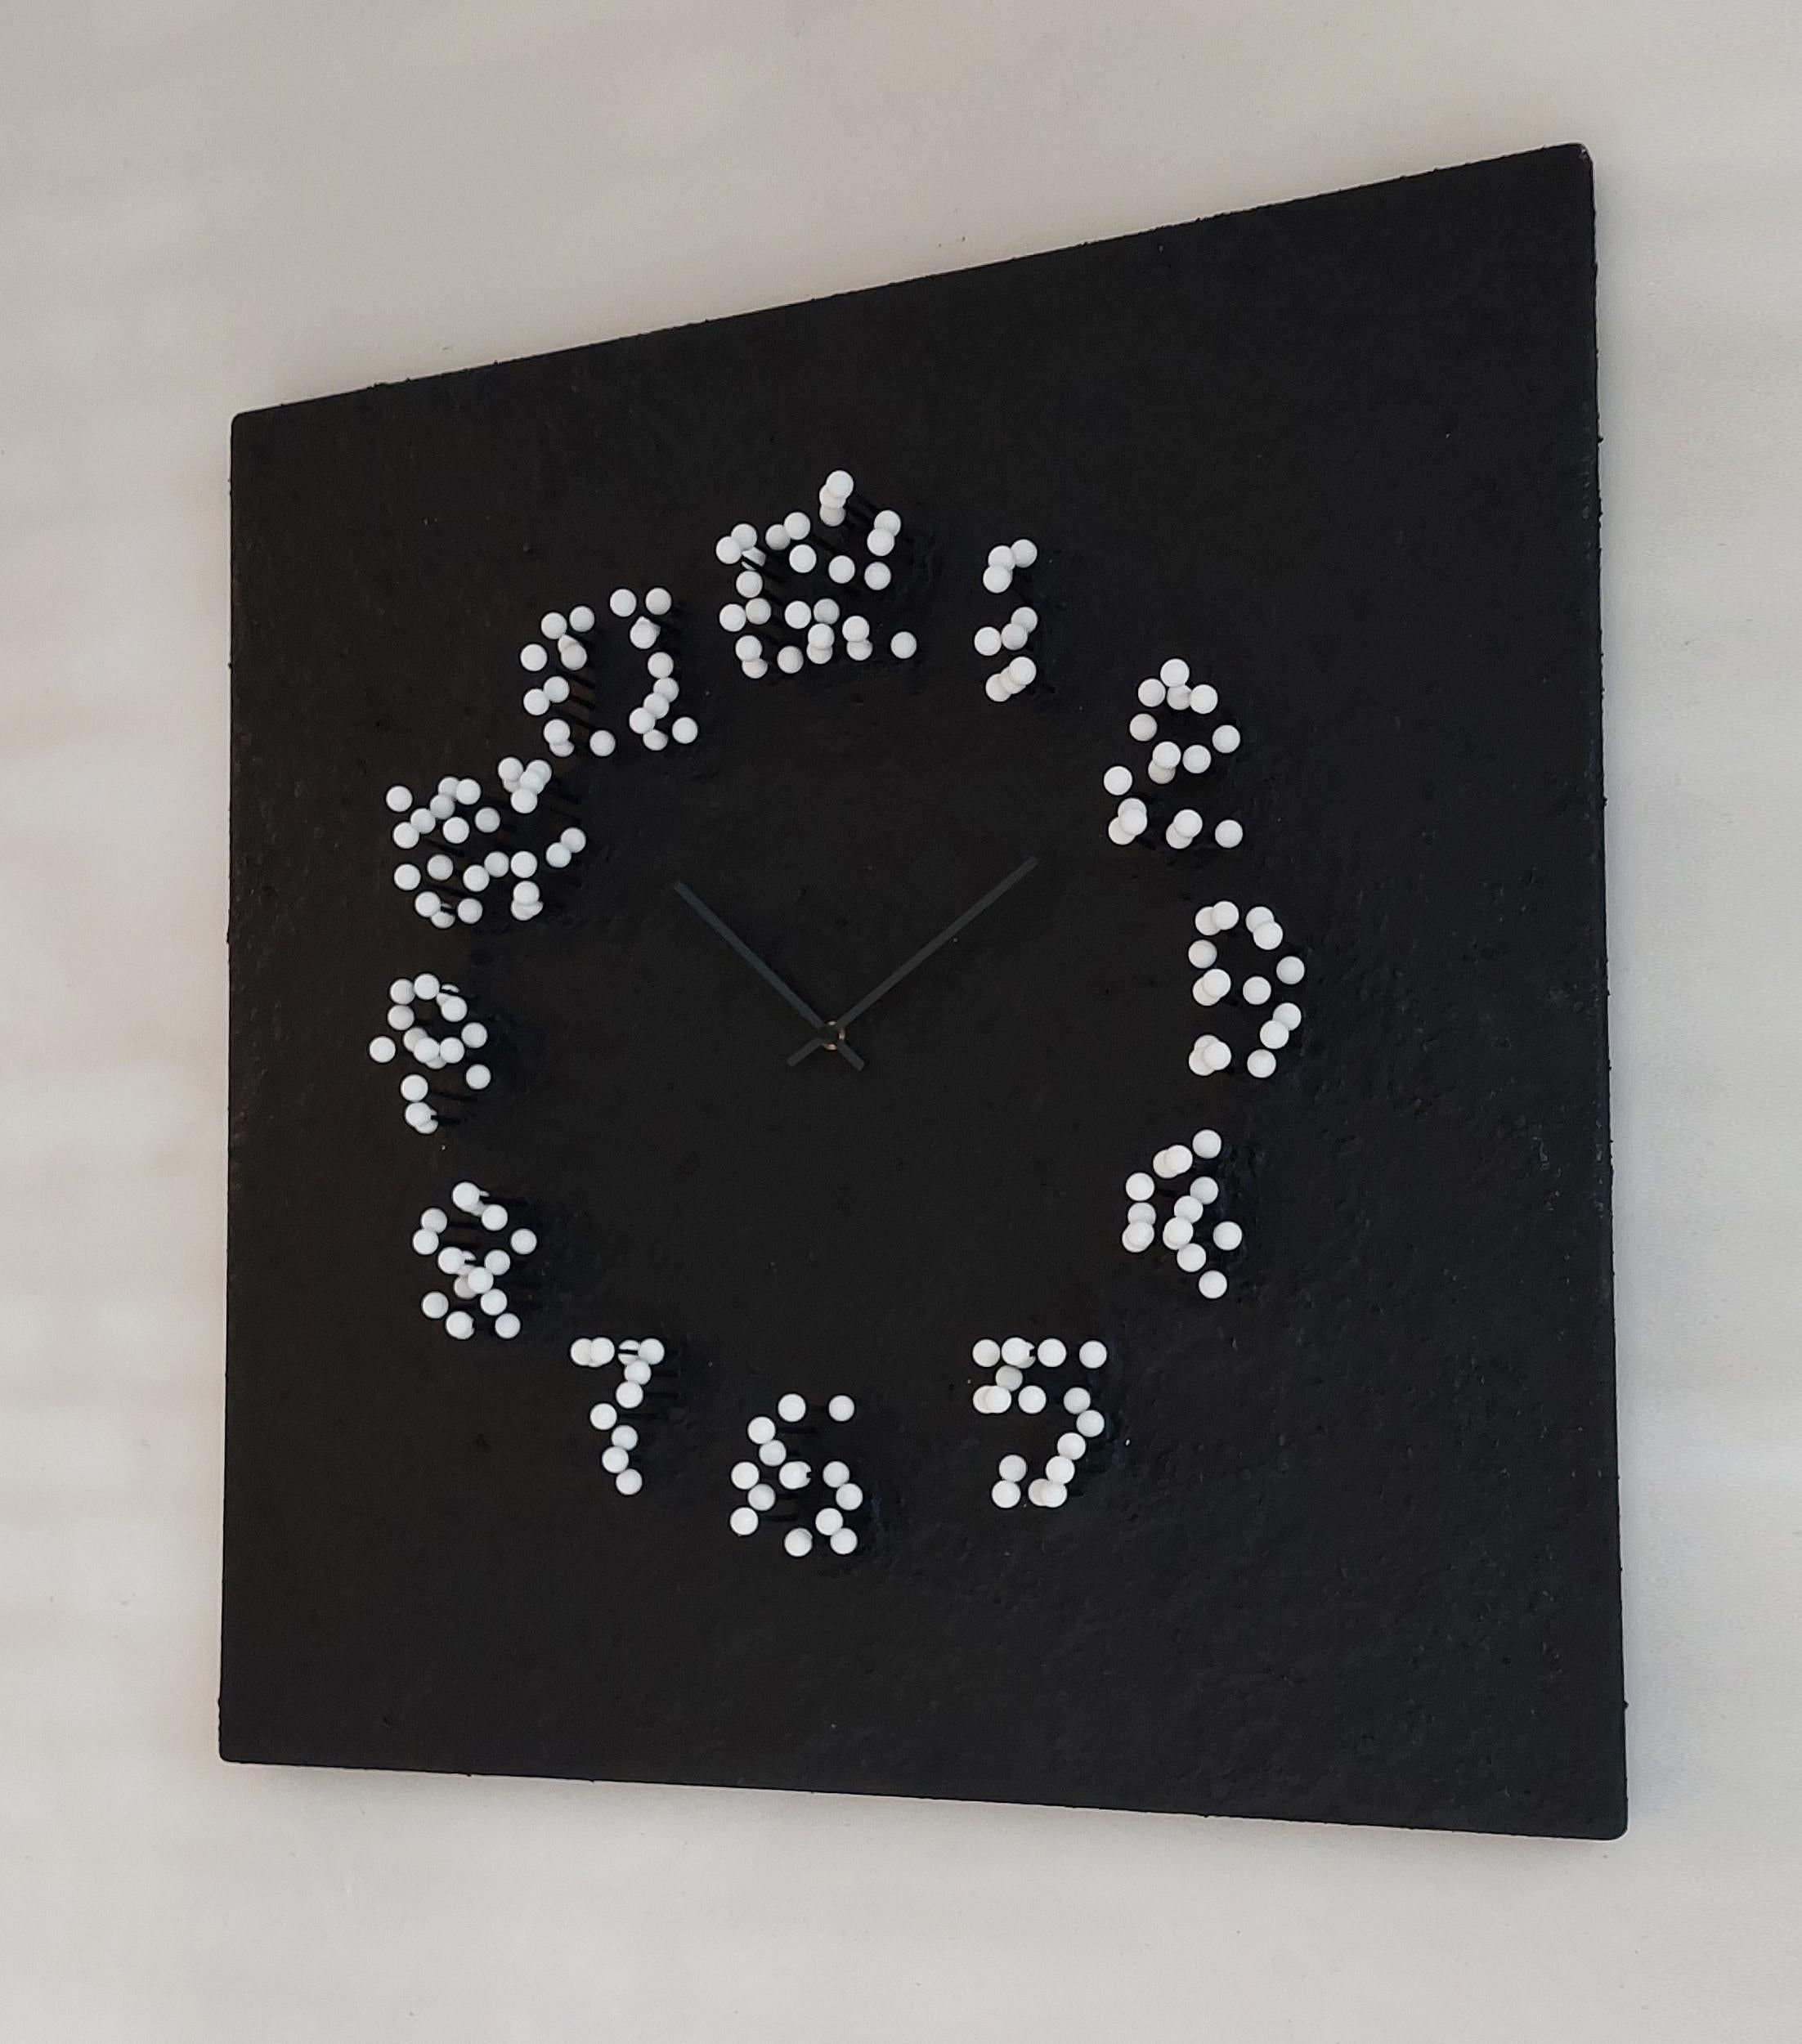 Mocap (moonwalk)
Illusionistic wall clock
Design: JAN PAUL


“Time is an illusion”
Most wall-clocks have the same basic shape: round. Also the same looking time-indication by 
numbers or stripes.
“MOCAP” steps away from the basic. It’s appearance